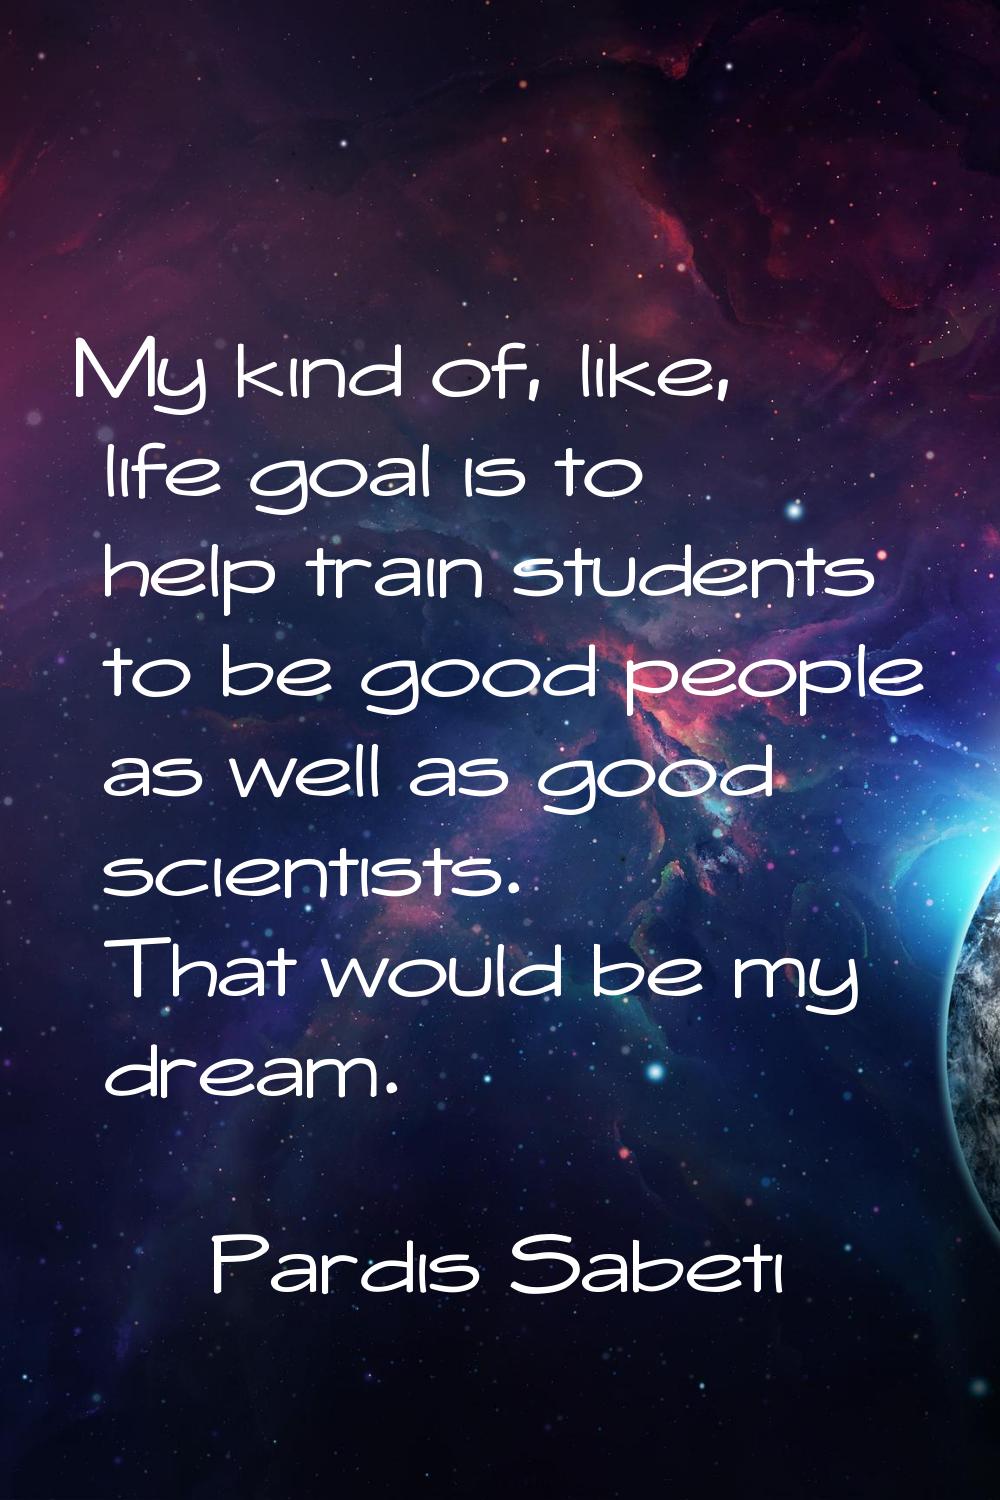 My kind of, like, life goal is to help train students to be good people as well as good scientists.